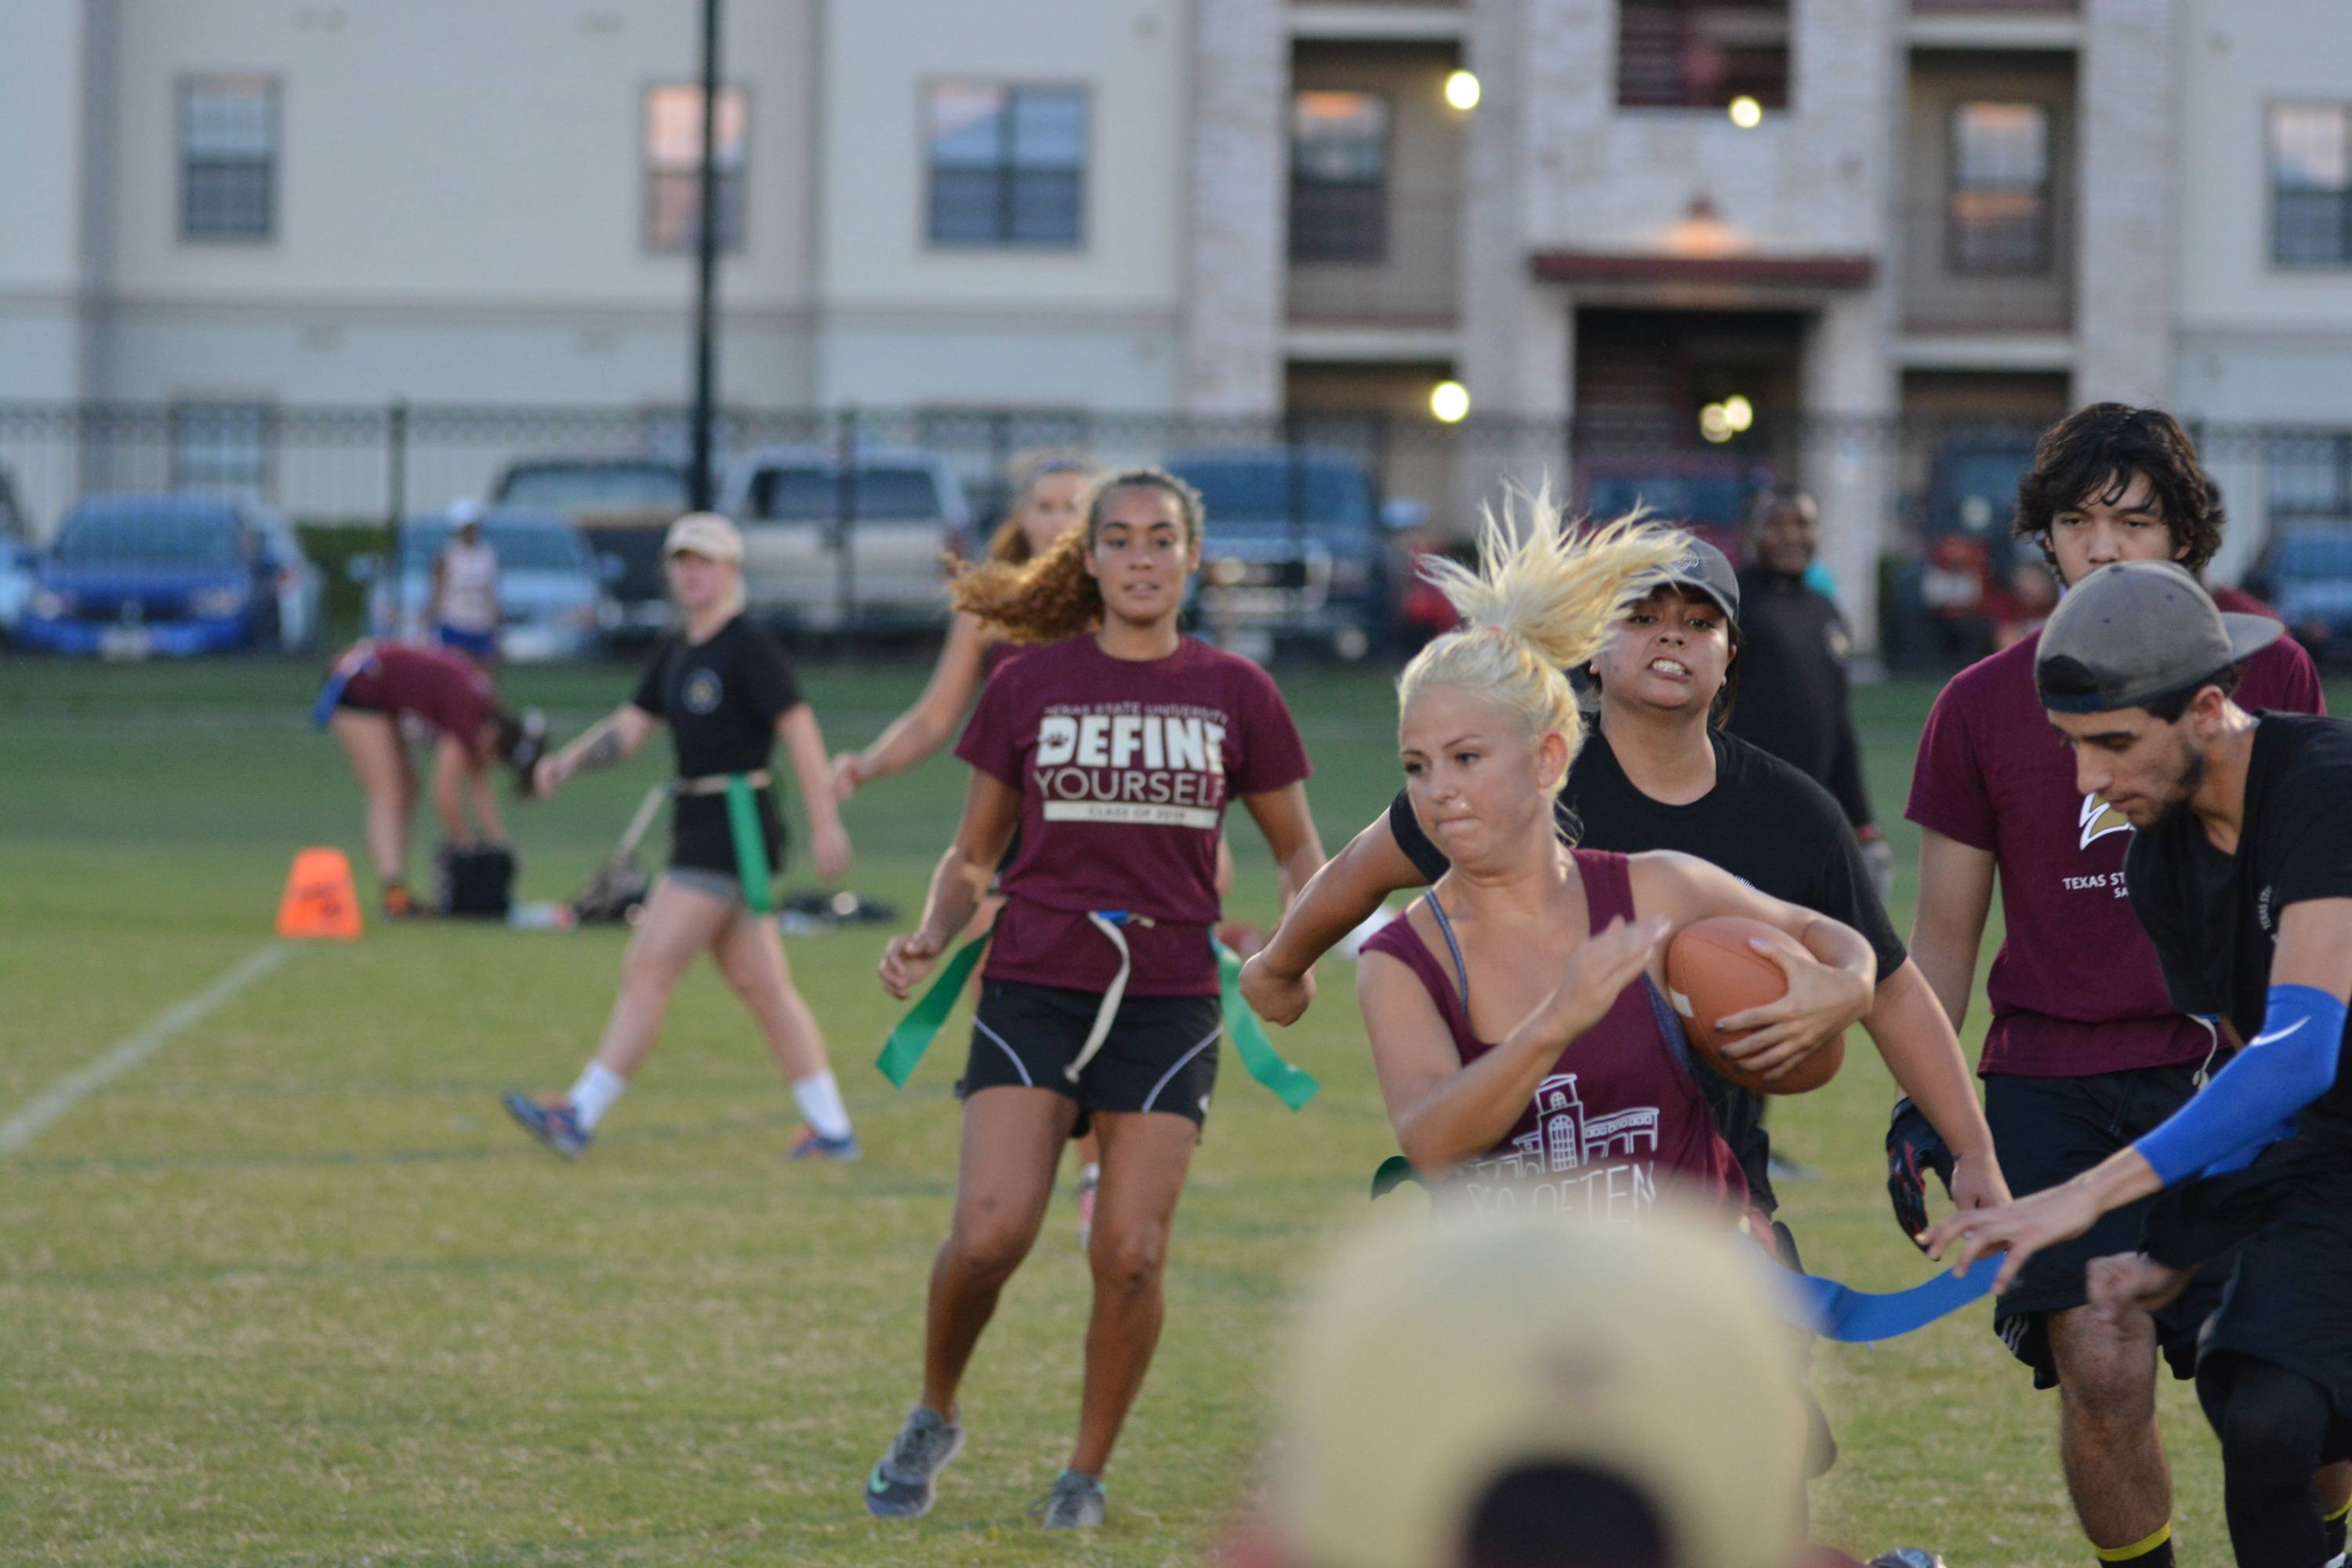 Flag football game; Girl running with a ball